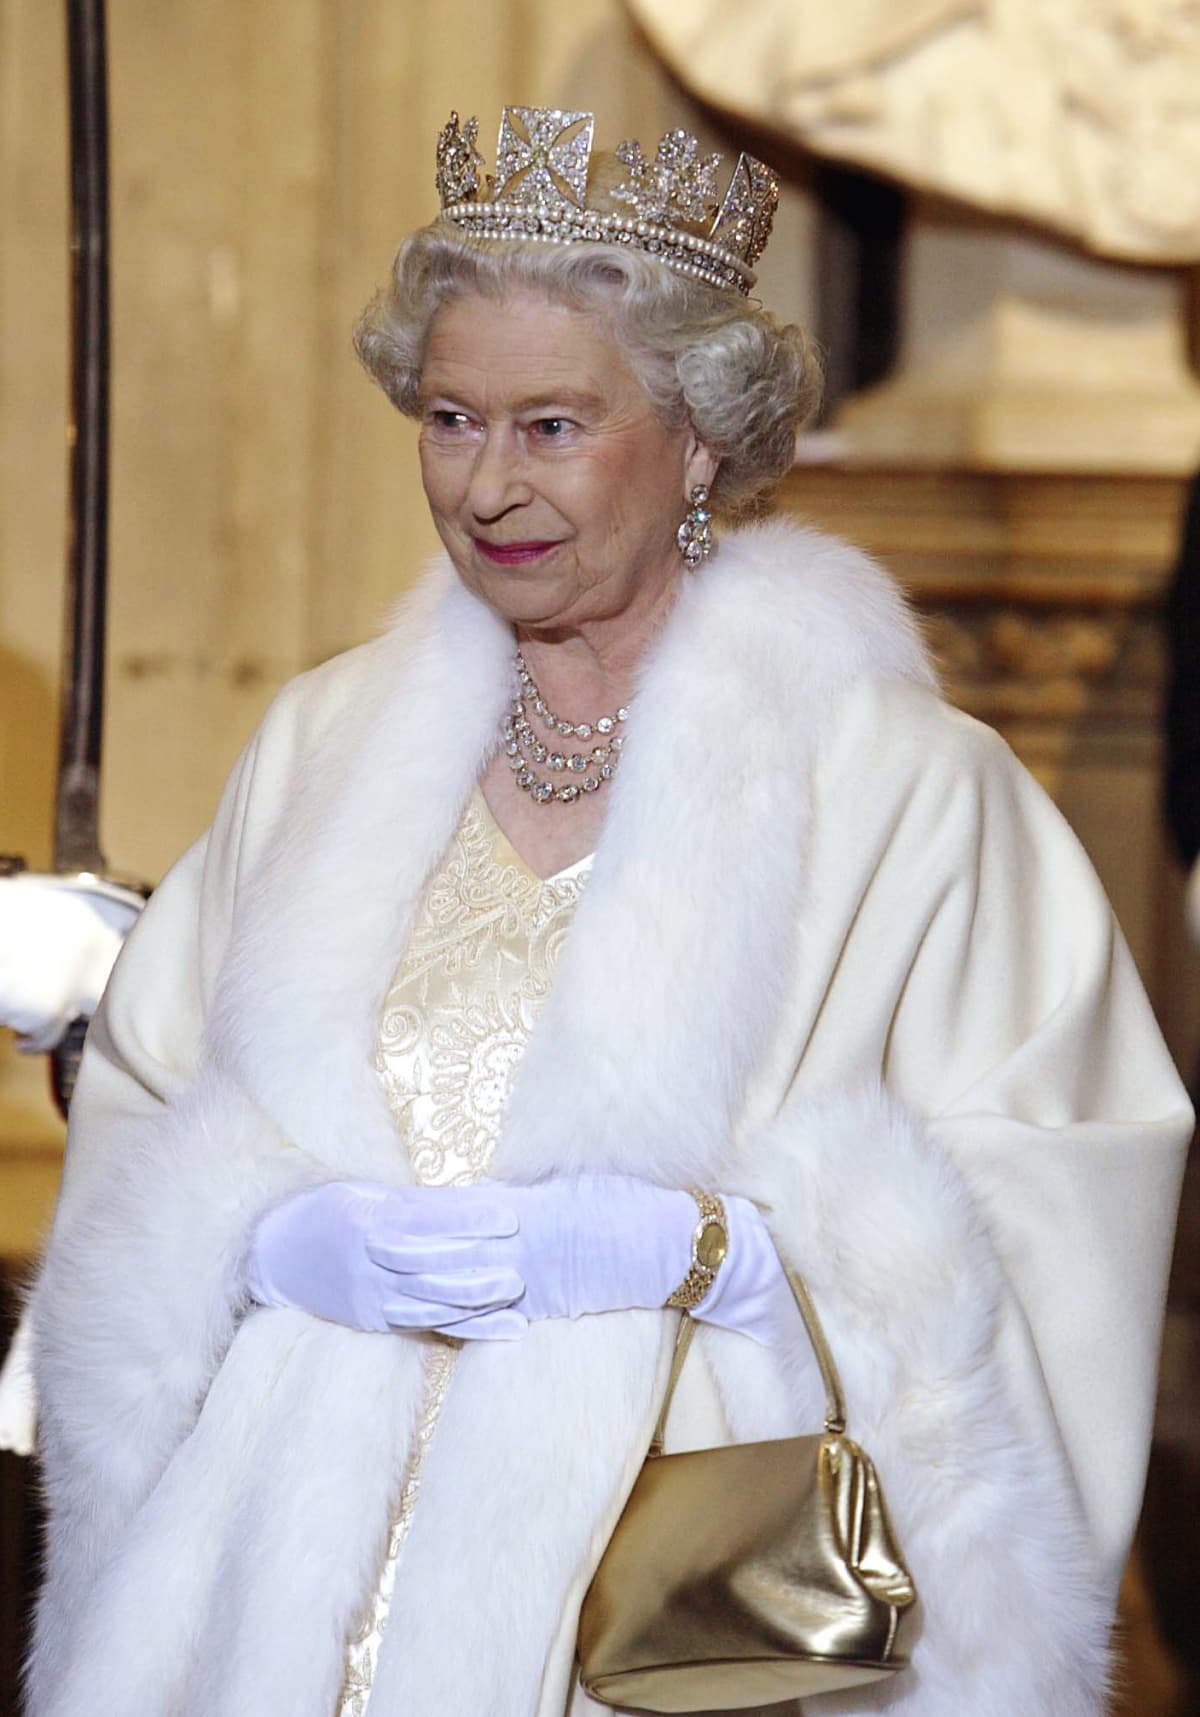 LONDON, ENGLAND - MAY 17: Queen Elizabeth II attends the Elizabeth line's official opening at Paddington Station on May 17, 2022 in London, England. (Photo by Andrew Matthews - WPA Pool/Getty Images)